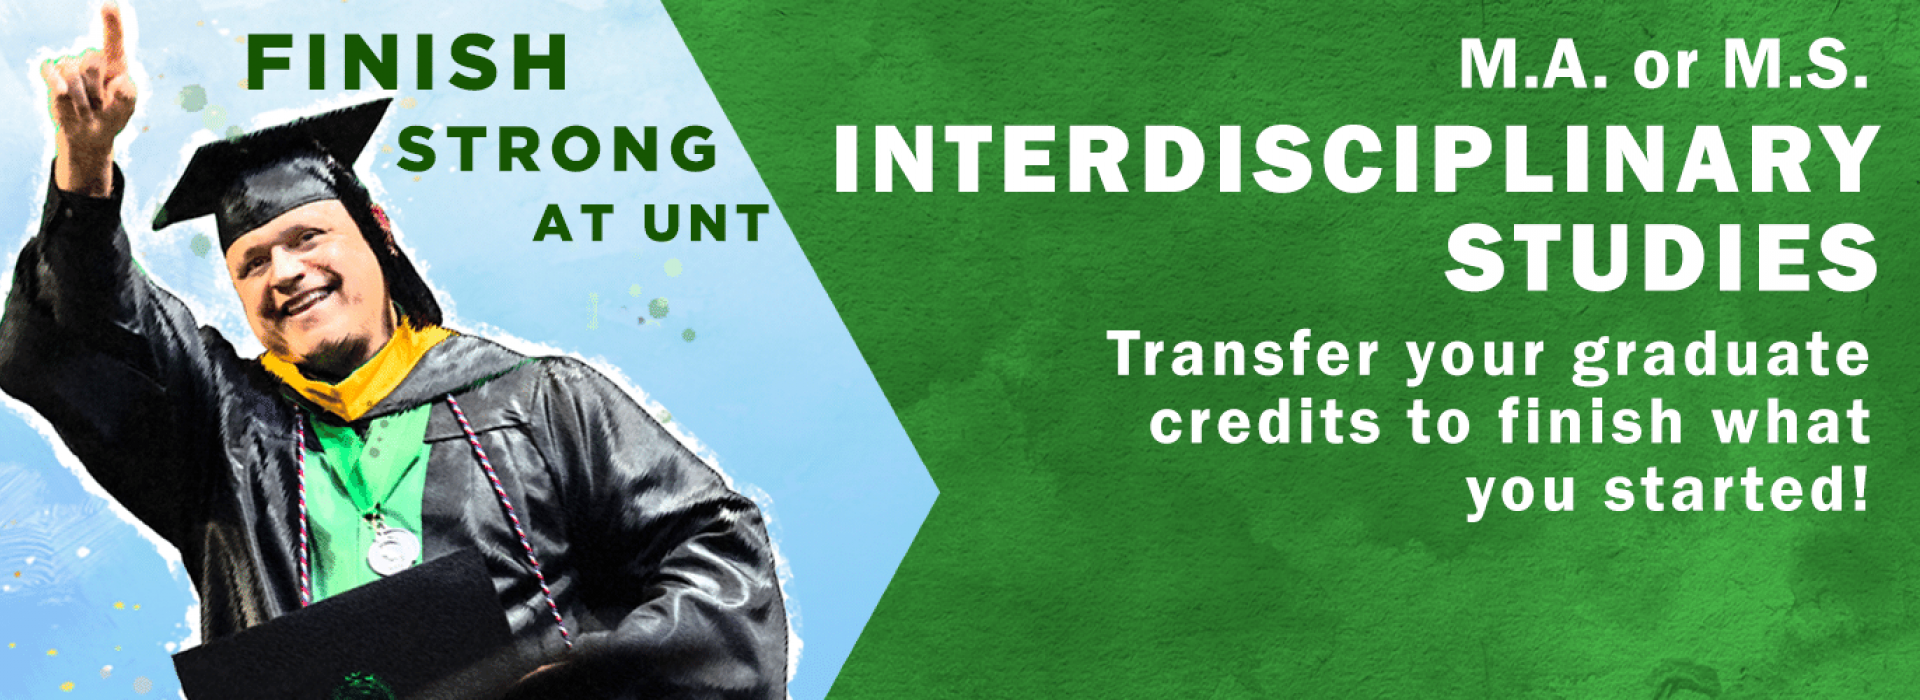 Interdisciplinary Studies, Finish Strong, Transfer your graduate credits to finish what you started